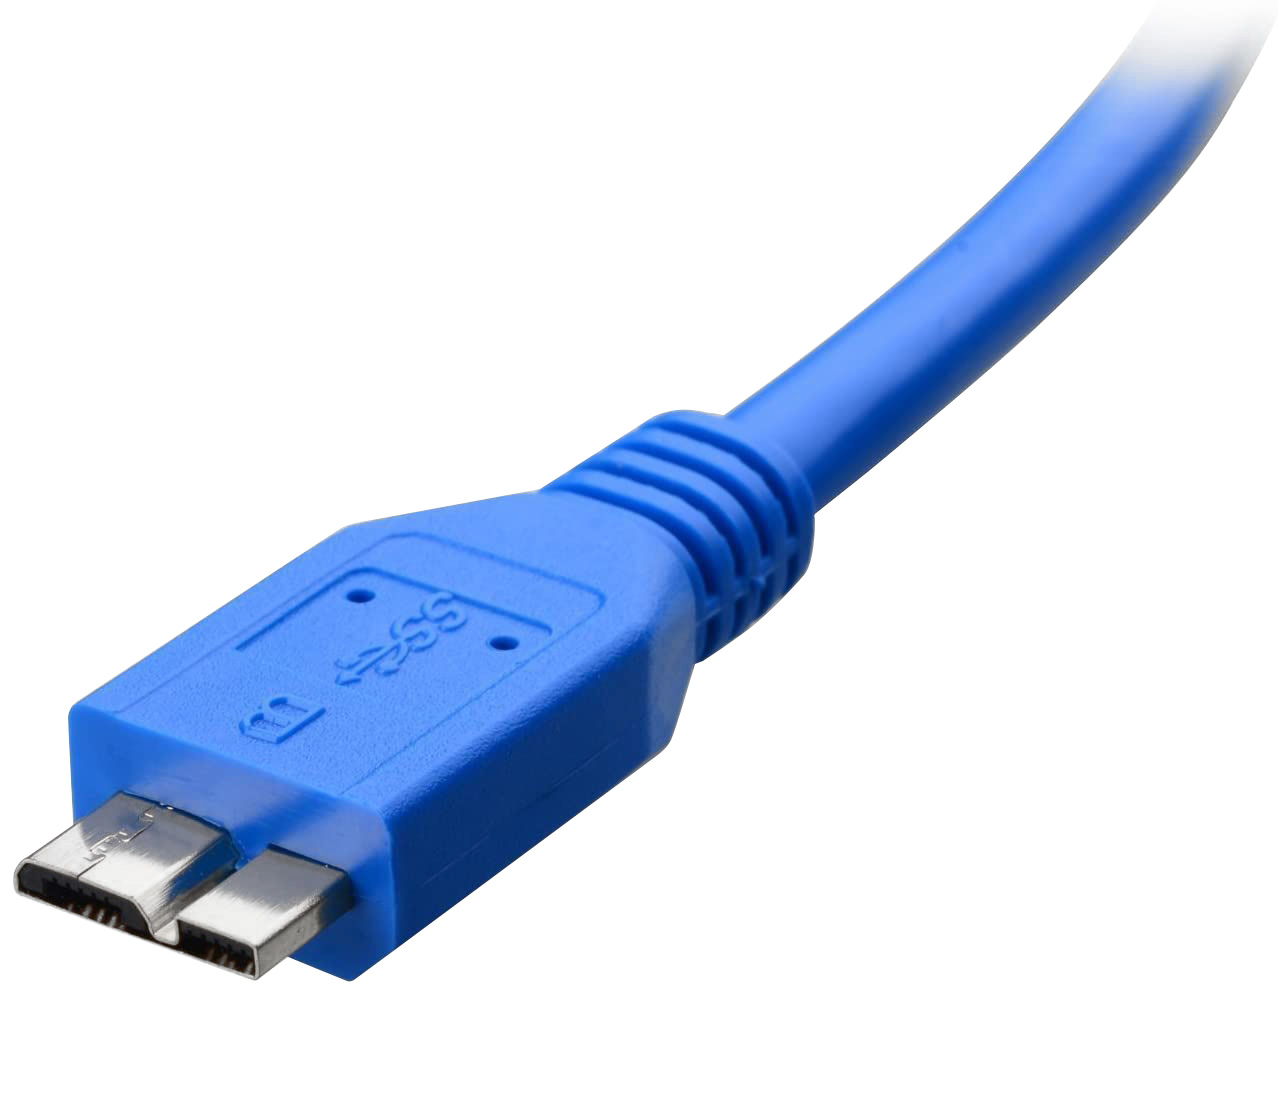 Superspeed USB 3.0 cable A / Micro B 1 m - USB Cables and Adapters - PC  Cables - Cables and Sockets